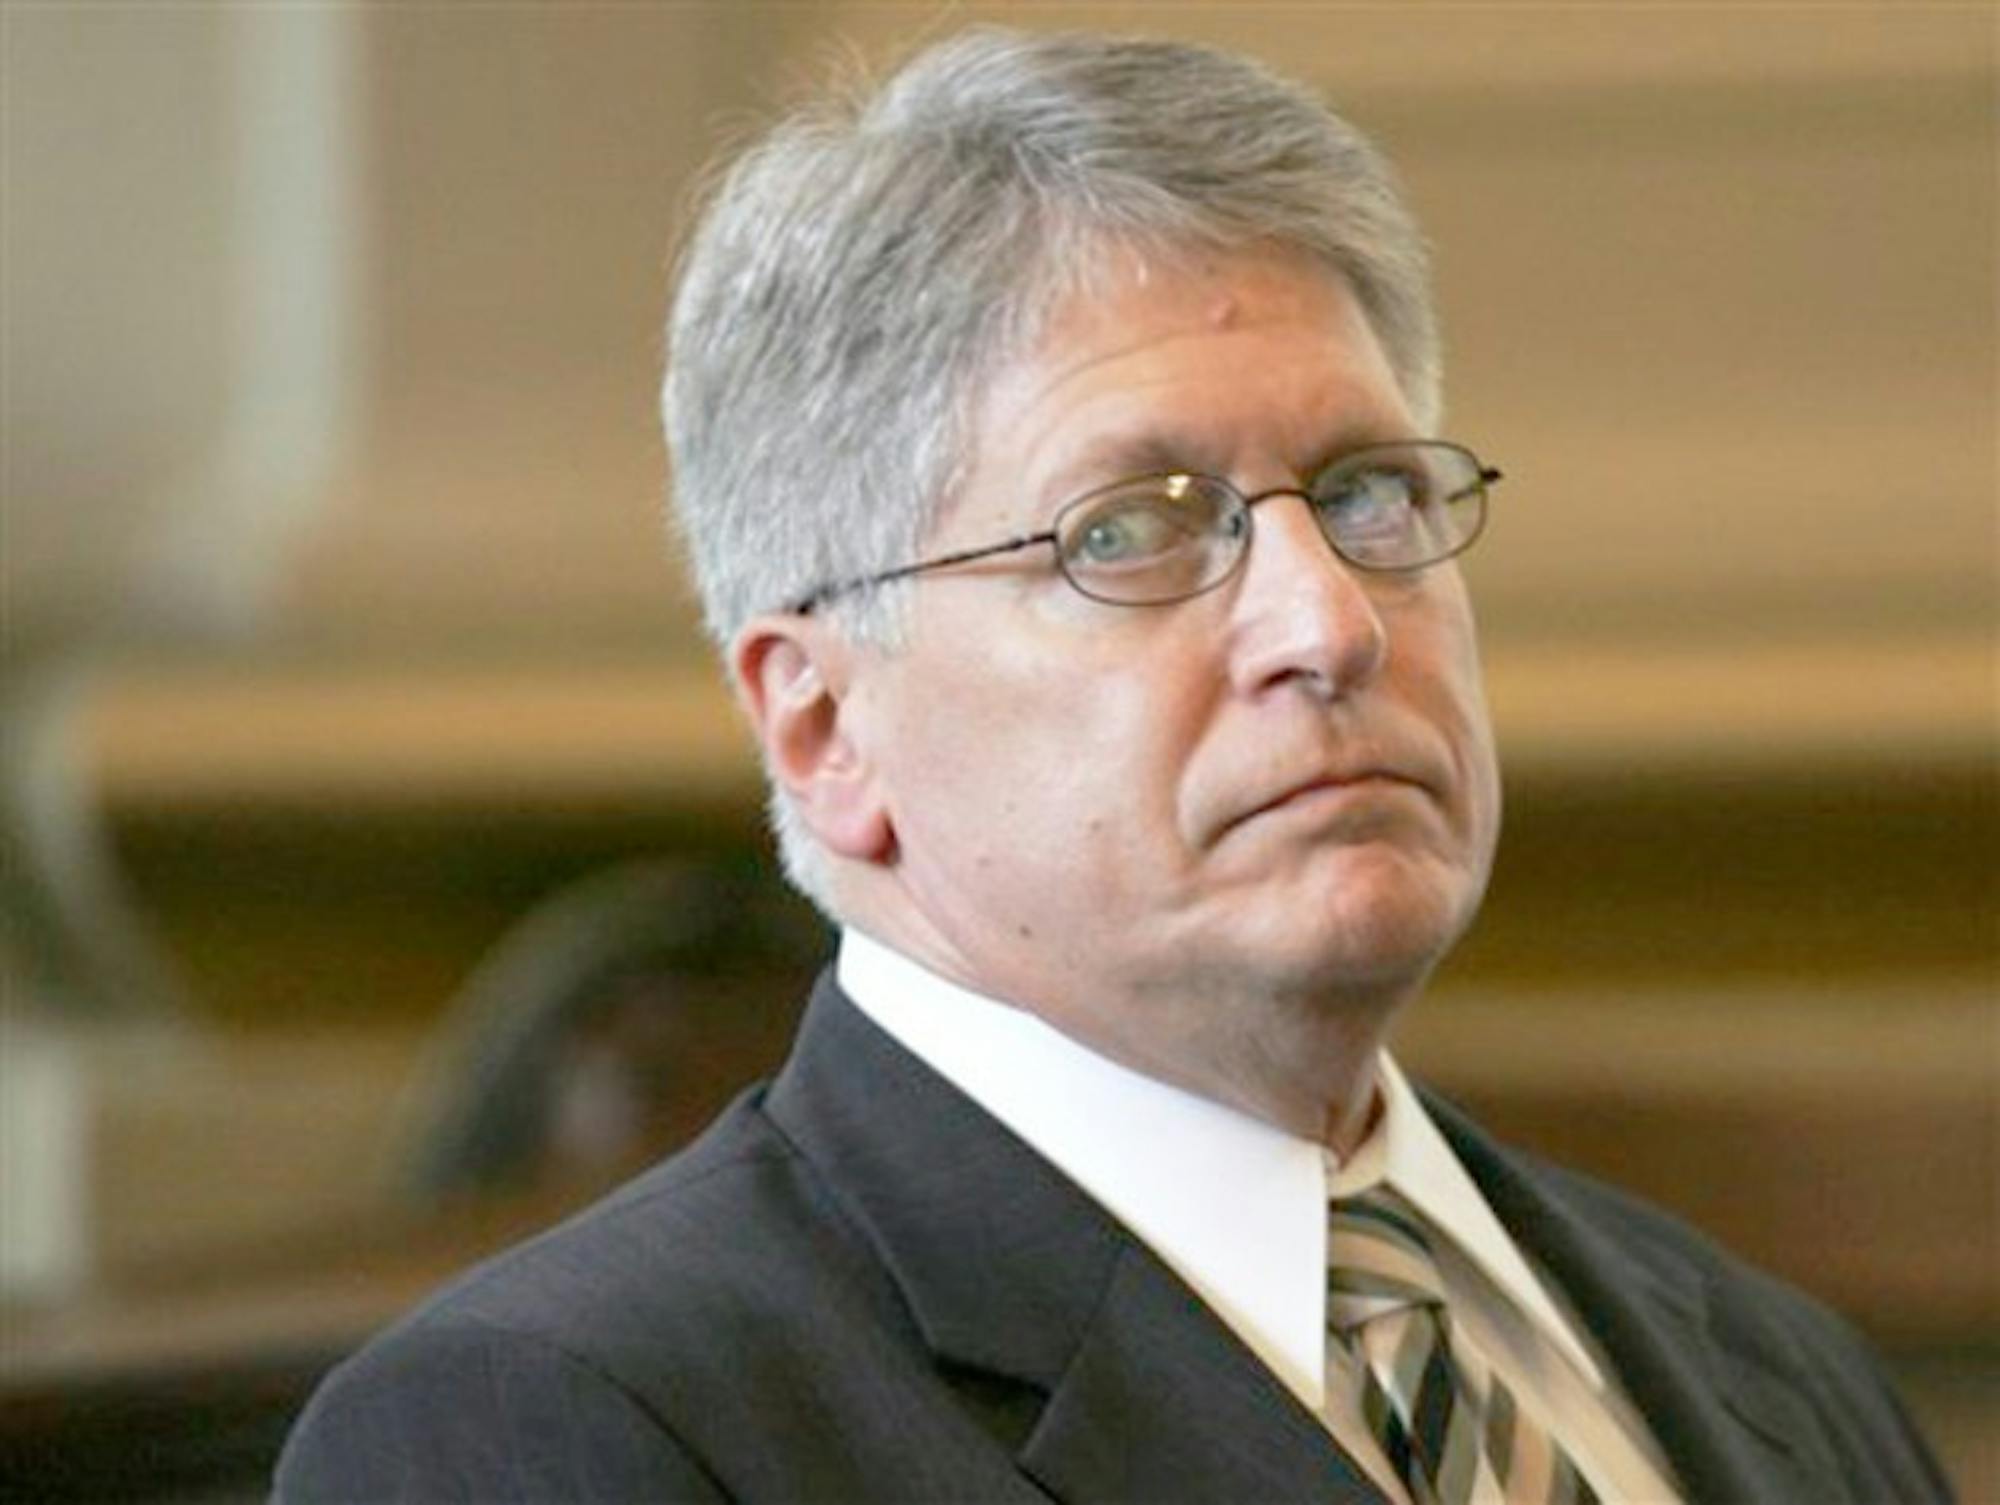 Former District Attorney Mike Nifong was disbarred on June 17, 2007